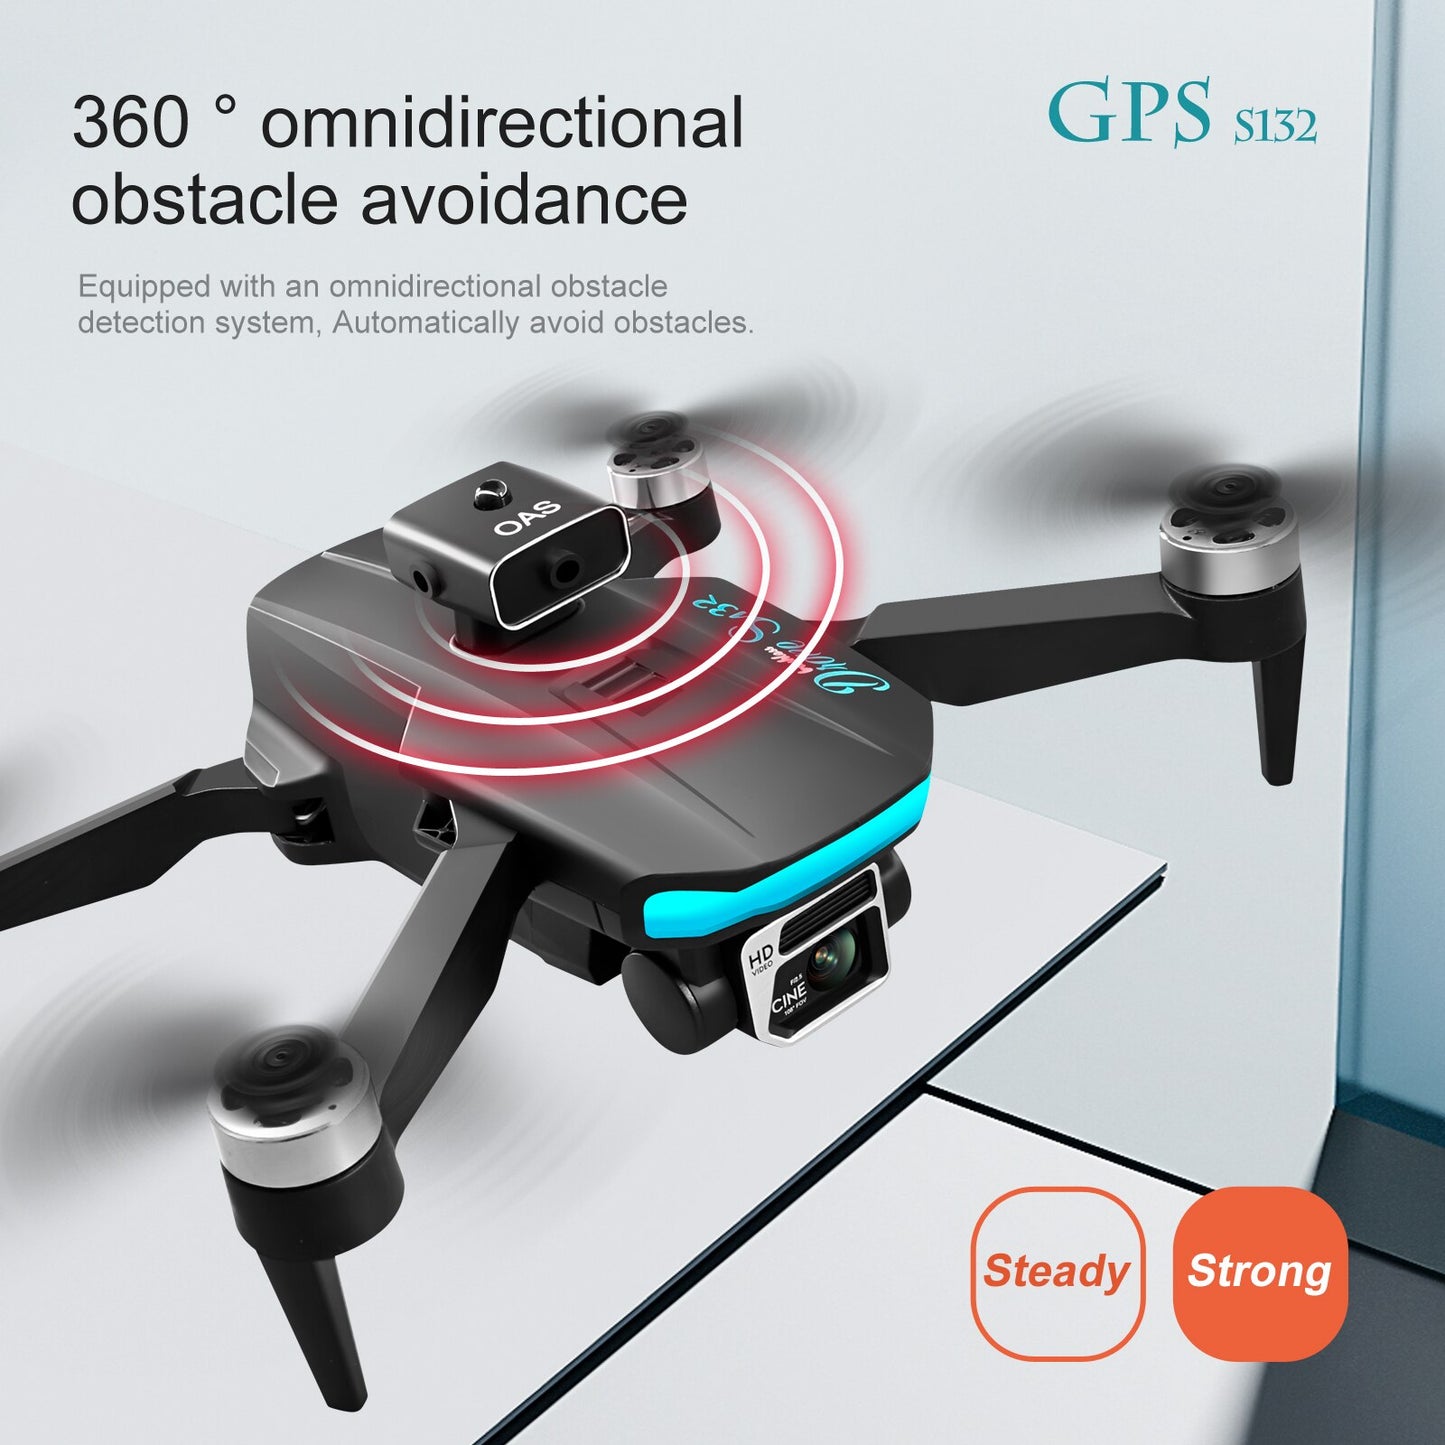 S132 Drone, omnidirectional GPS s132 obstacle avoidance system . 360